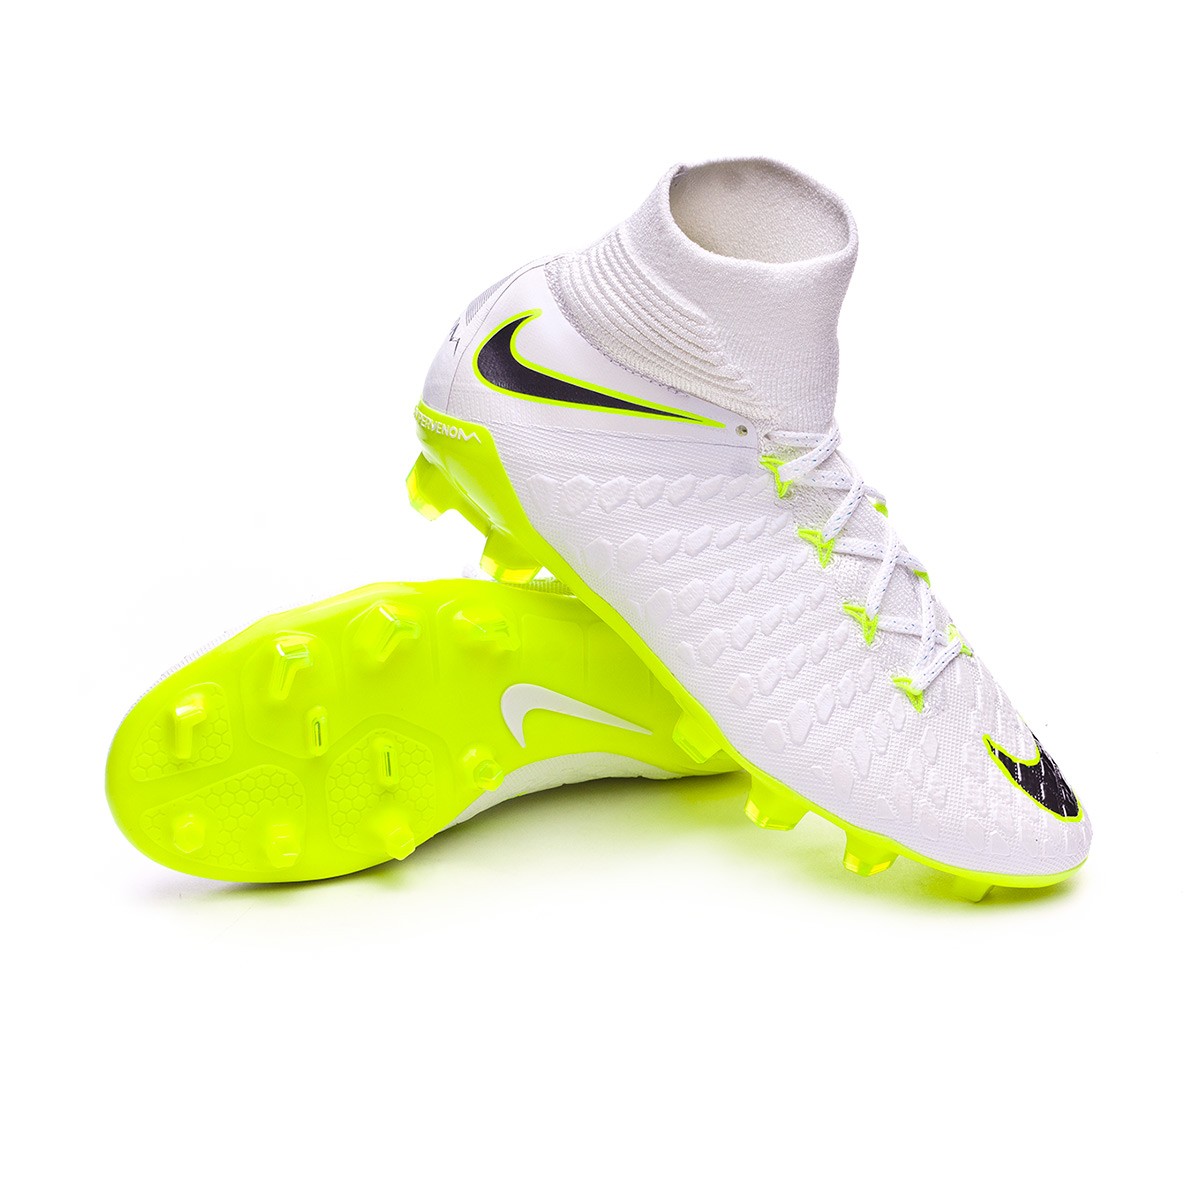 Attack with precision. Nike Phantom 'New Pro Direct Soccer